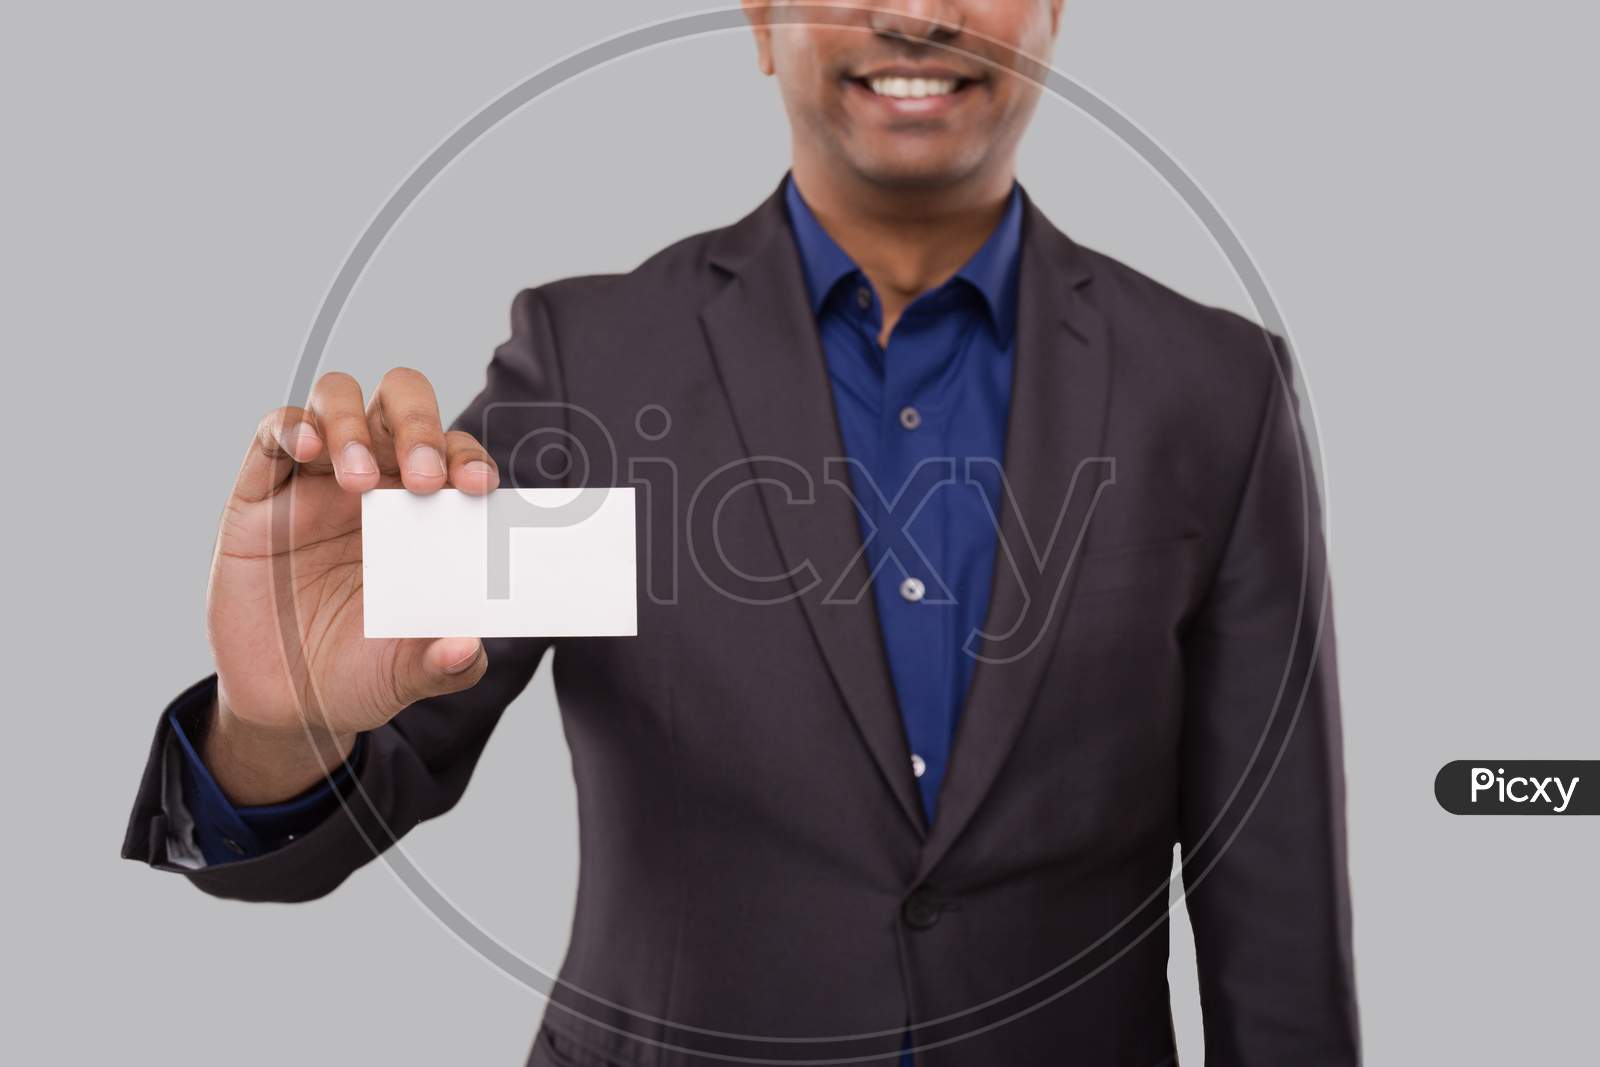 Businessman Showing Visit Card Isolated. Indian Business Man Blank Card In Hand